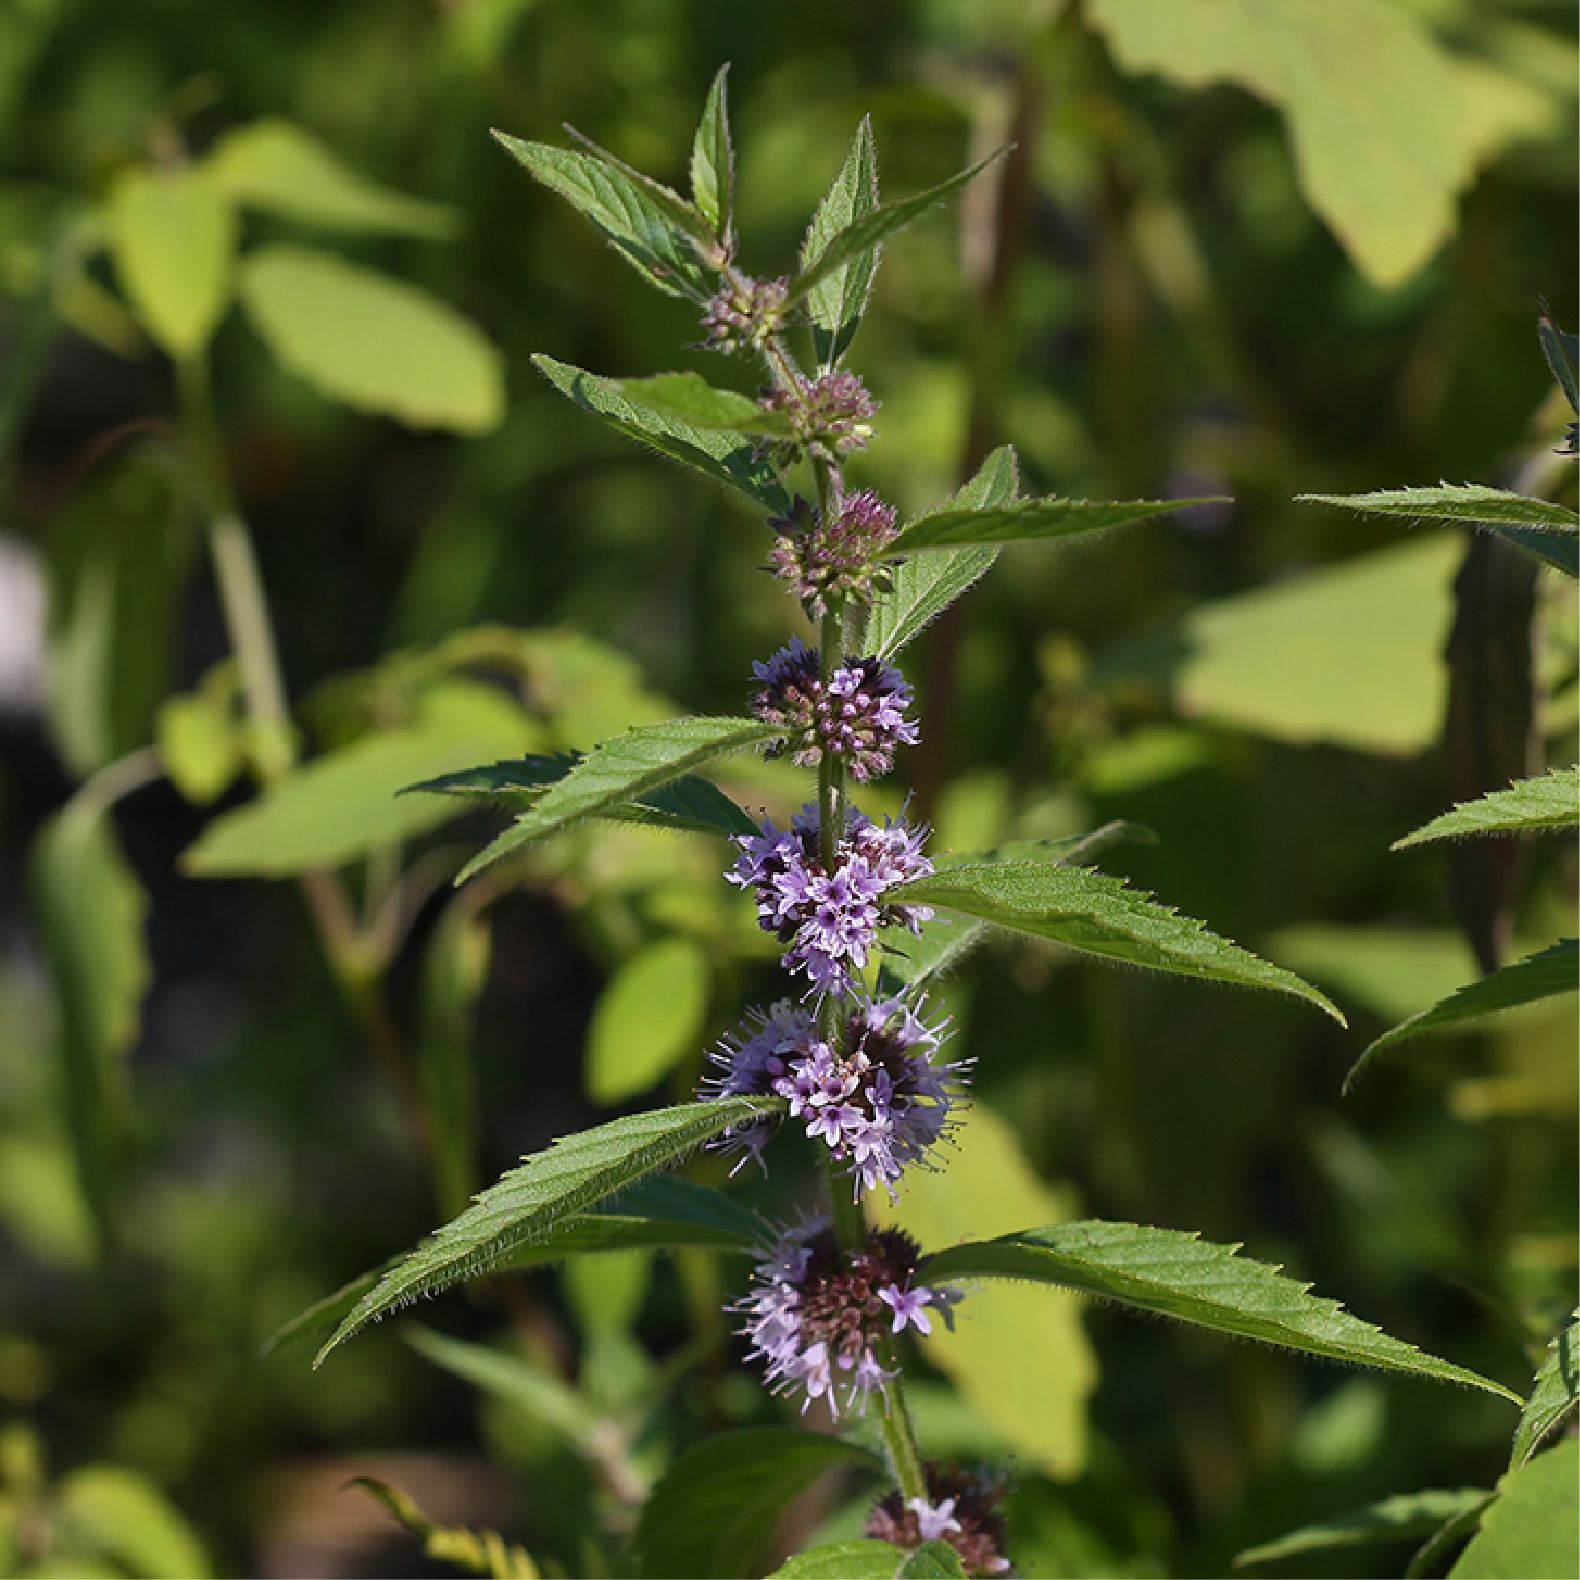 A close up of purple flower clusters on a stem with large green leaves.